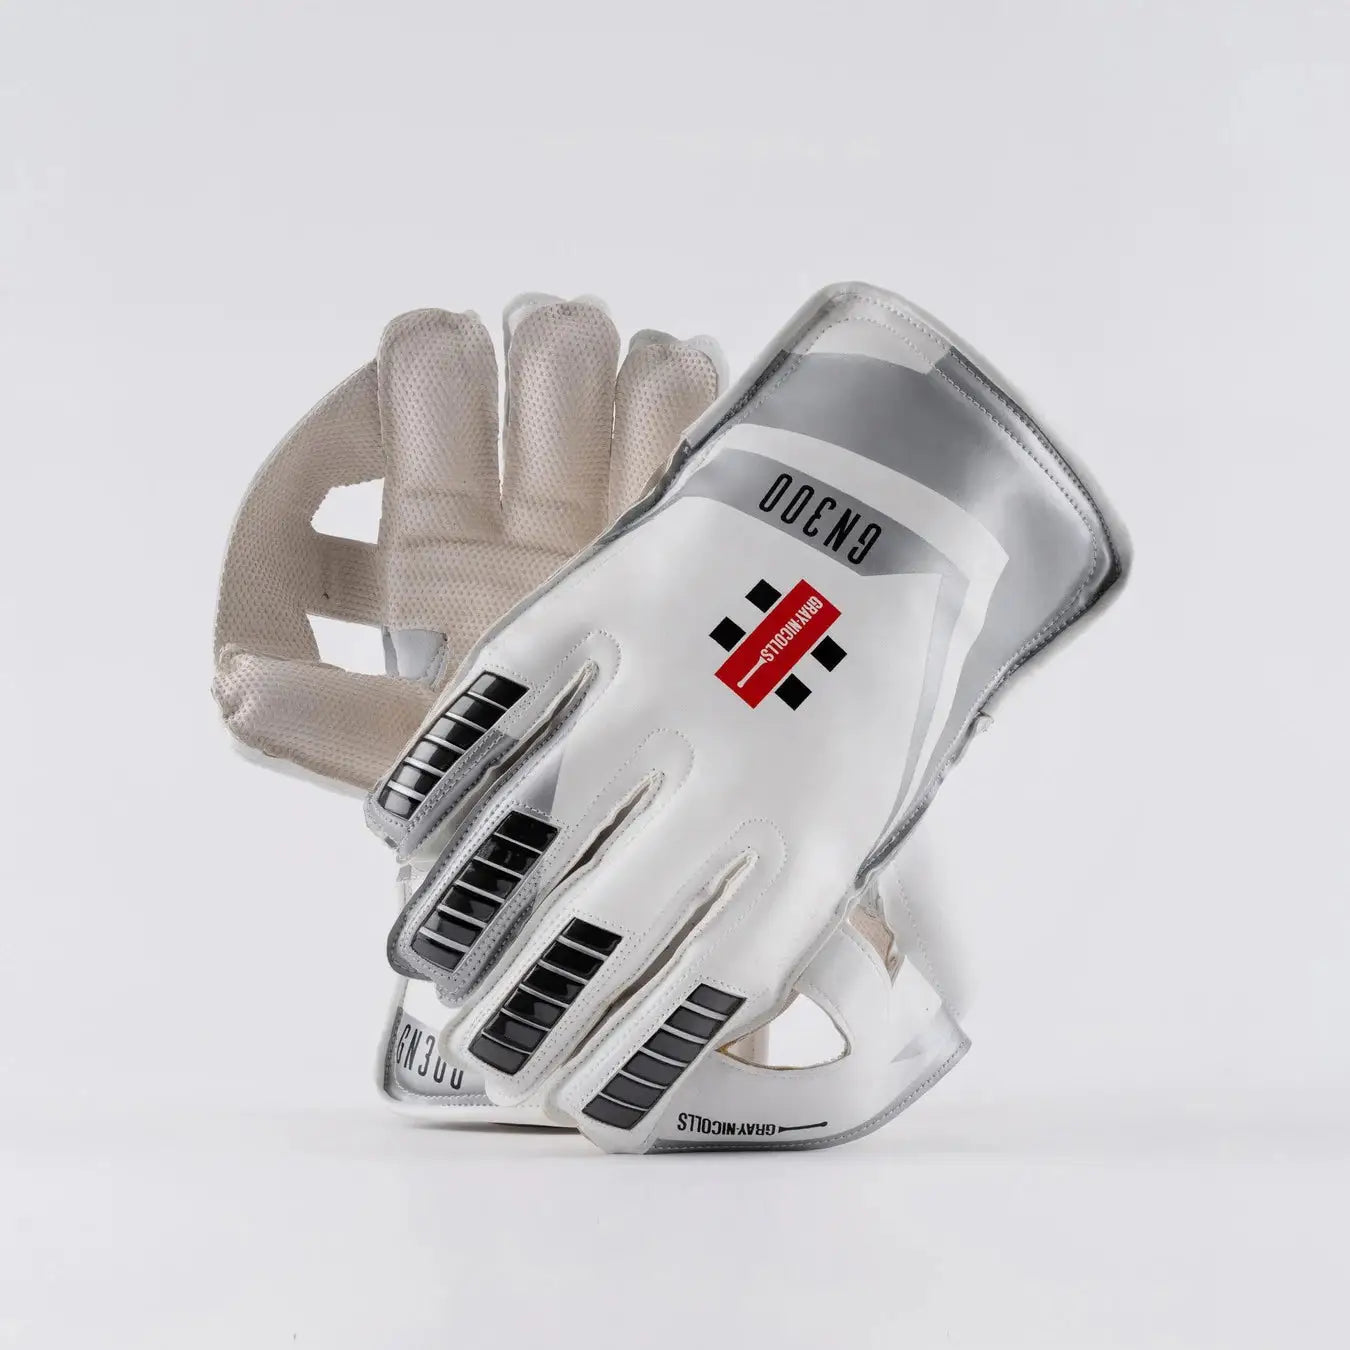 Gray-Nicolls GN300 Wicketkeeping Gloves - Adult - GLOVE - WICKET KEEPING